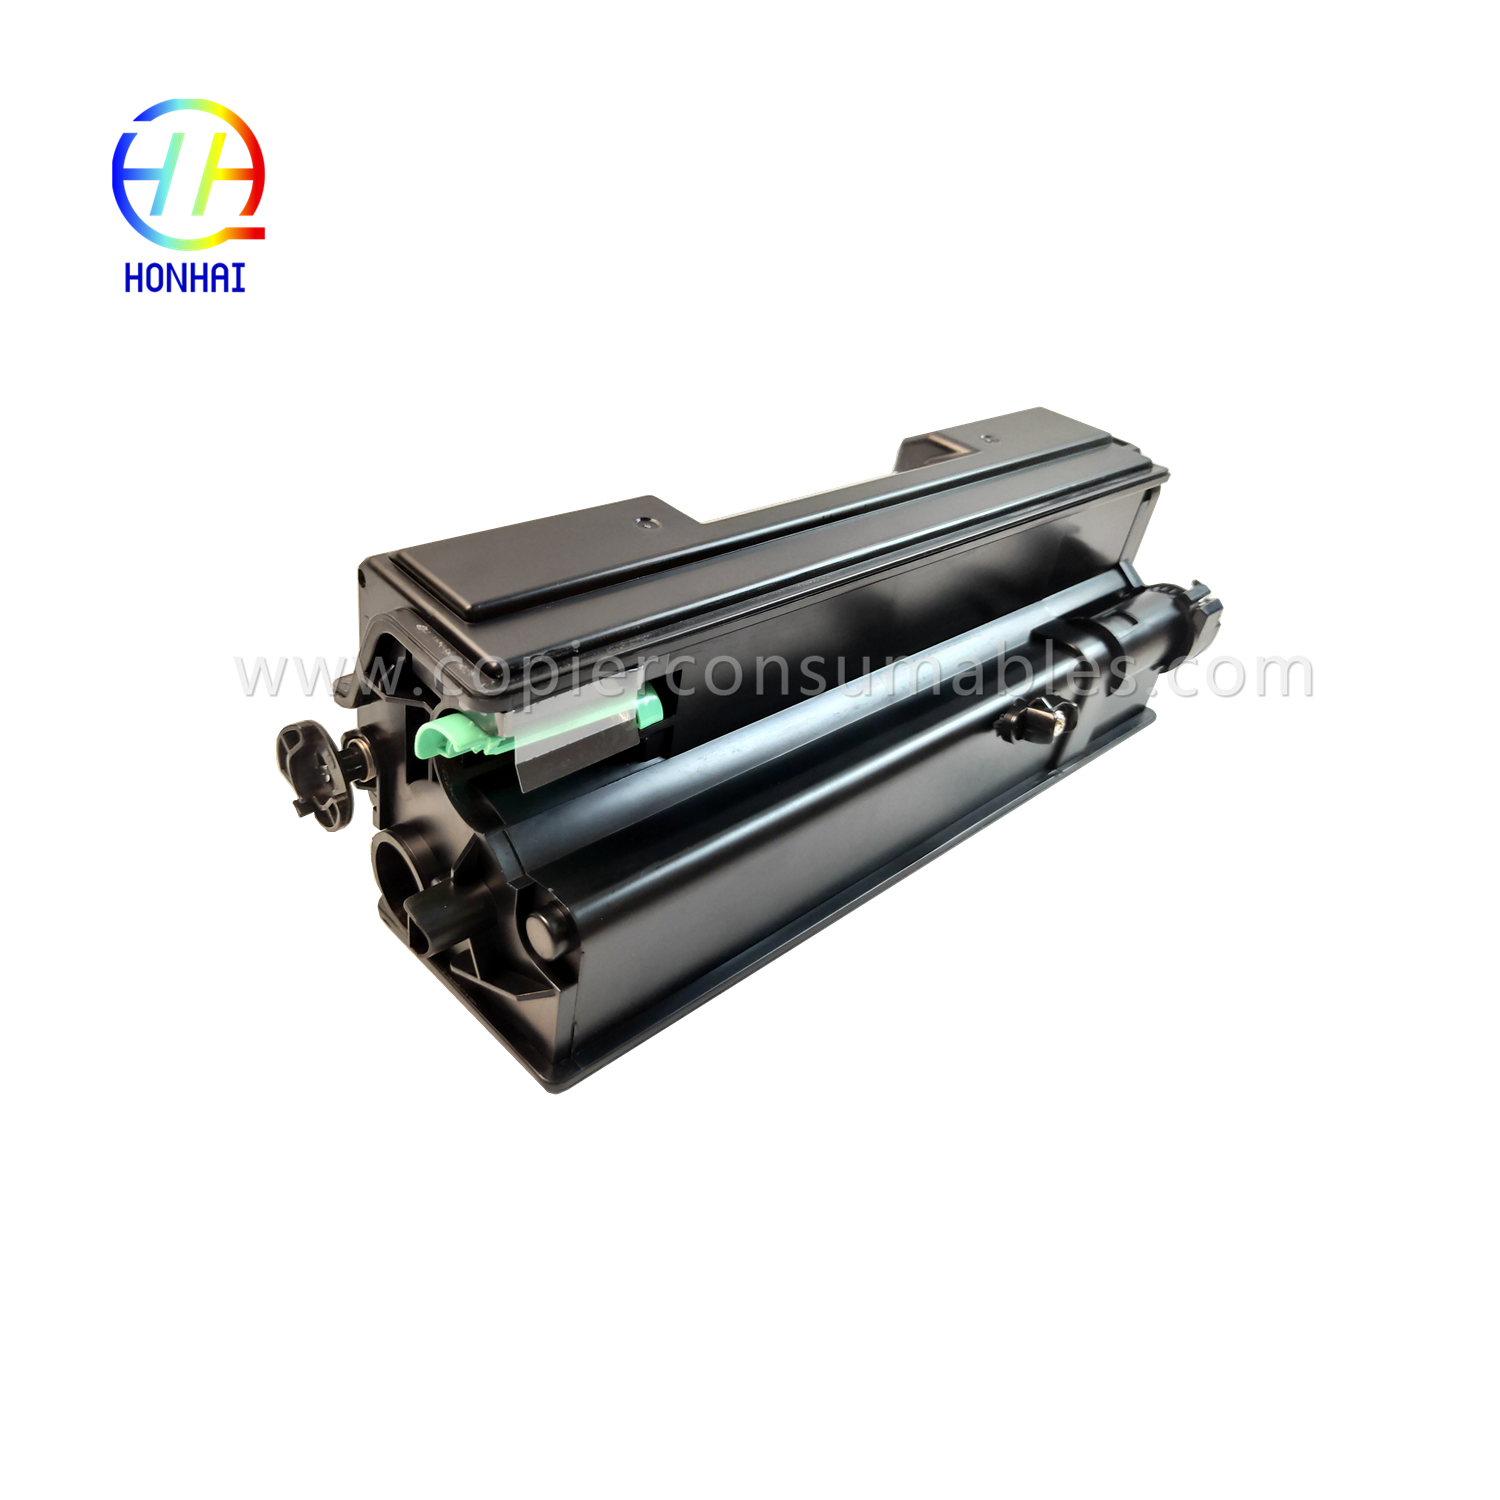 https://www.copierconsumables.com/toner-cartridge-%ef%bc%88japan-powder%ef%bc%89for-ricoh-mp401-mp401spf-mp402-mp402spf-sp4520-sp-4520dn-ref-841887-products /